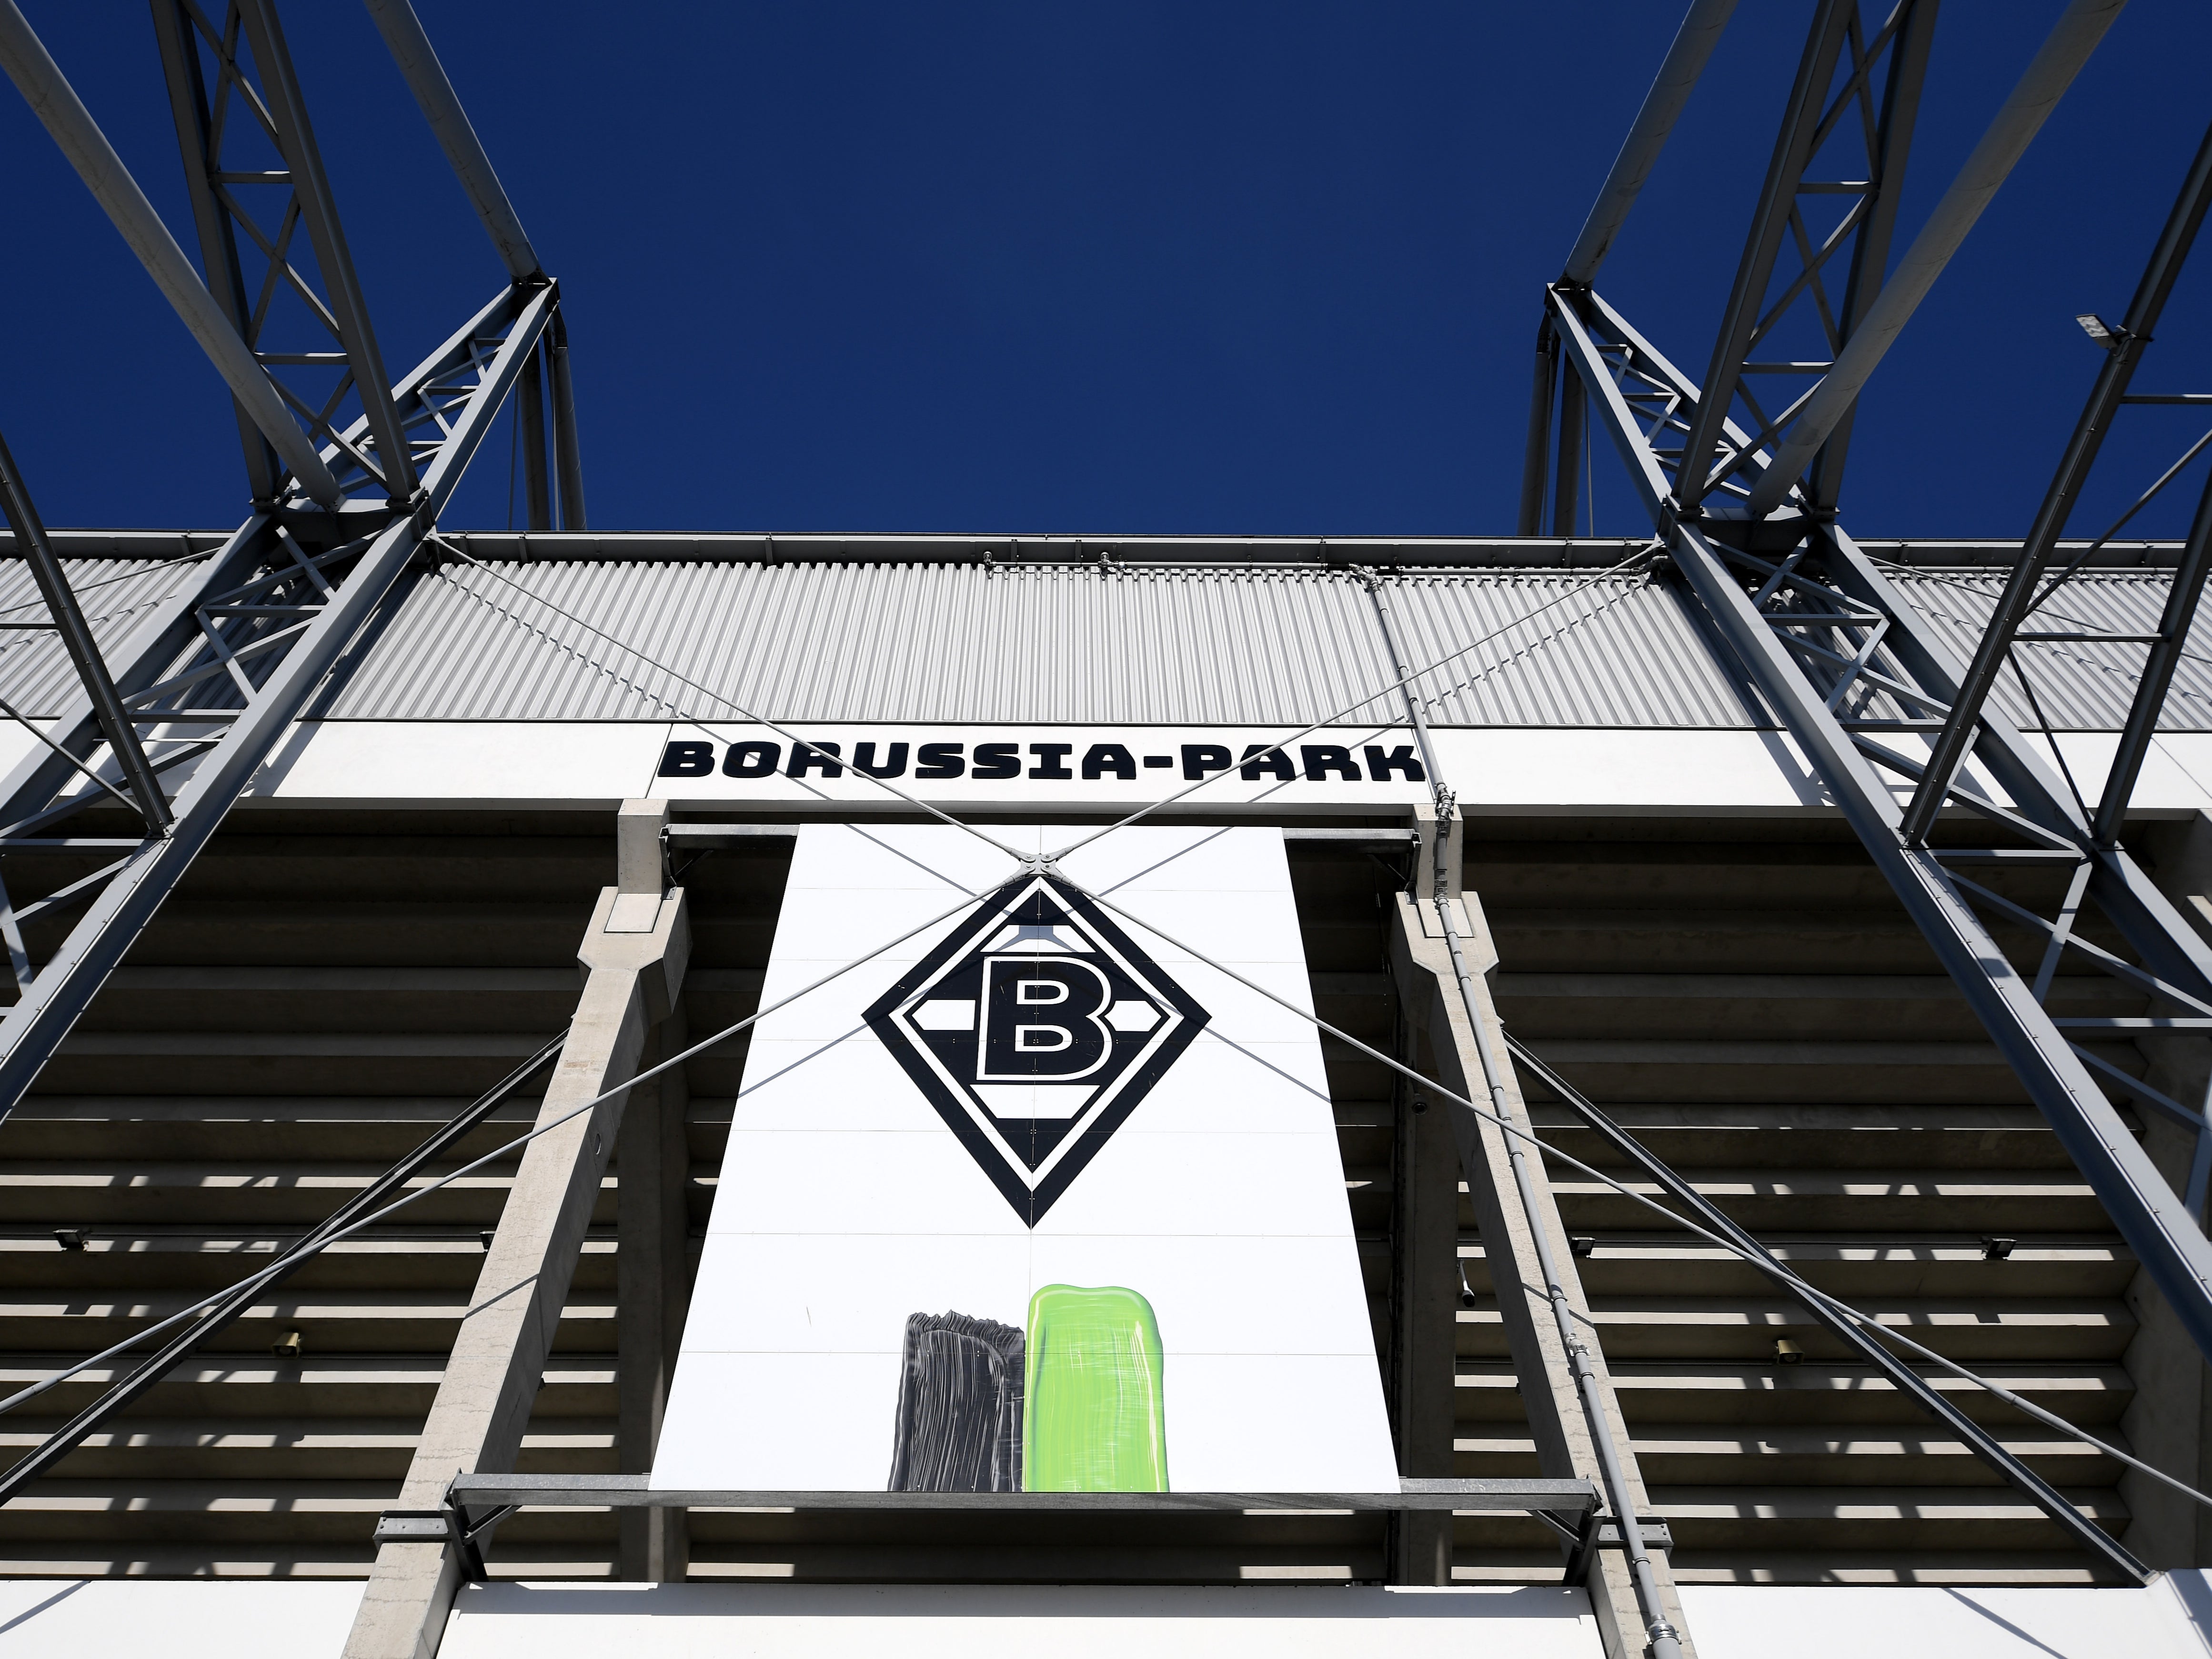 A general view of the Stadion im Borussia-Park